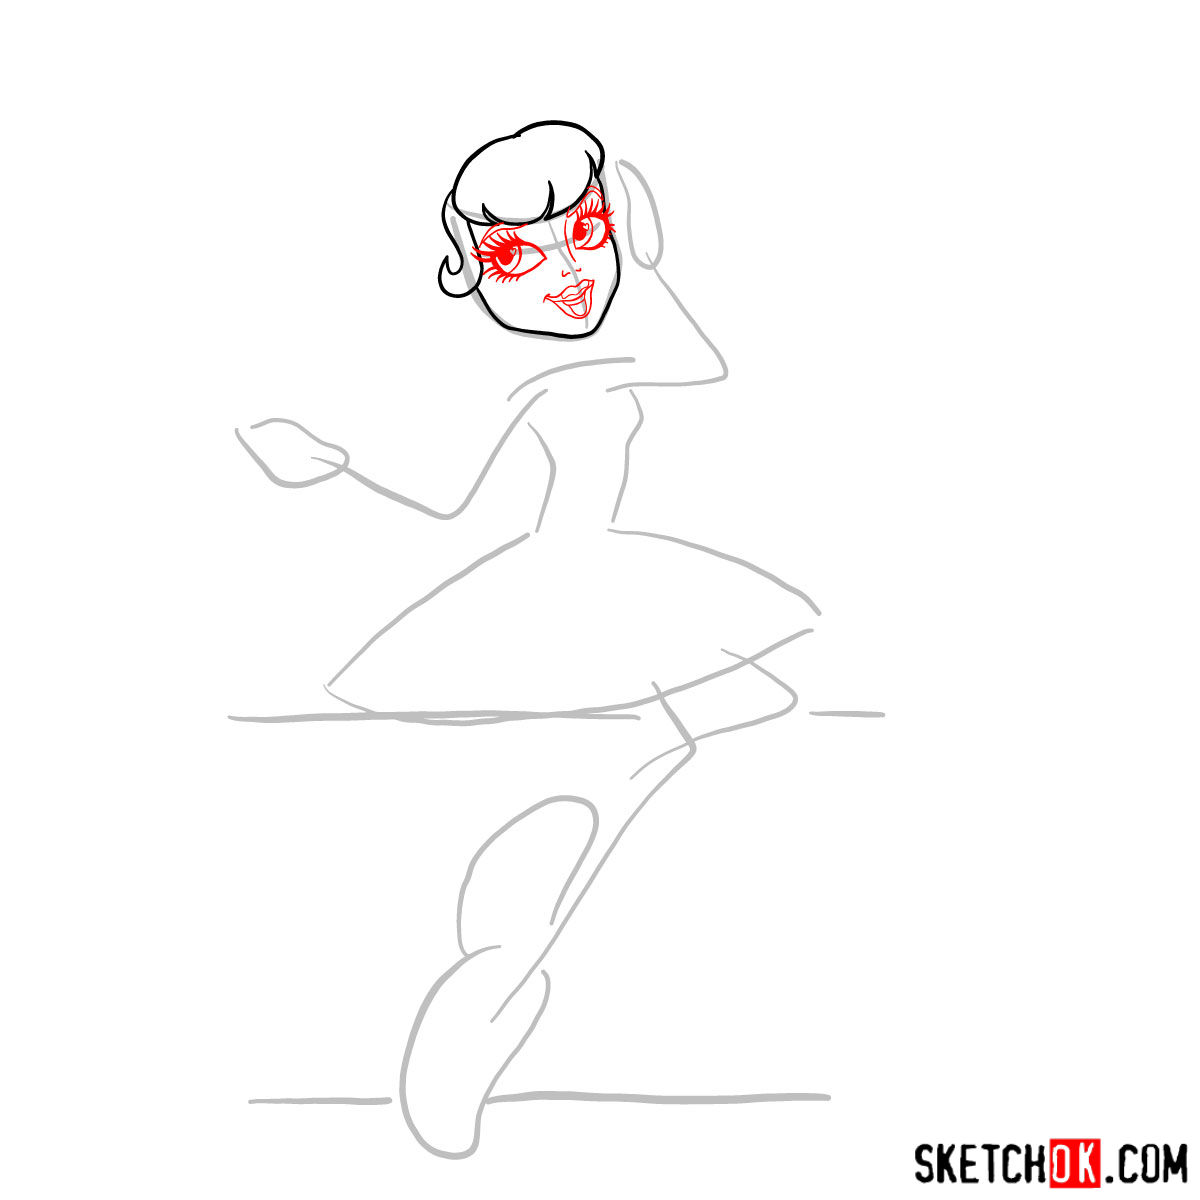 How to draw C.A. Cupid step by step - step 04